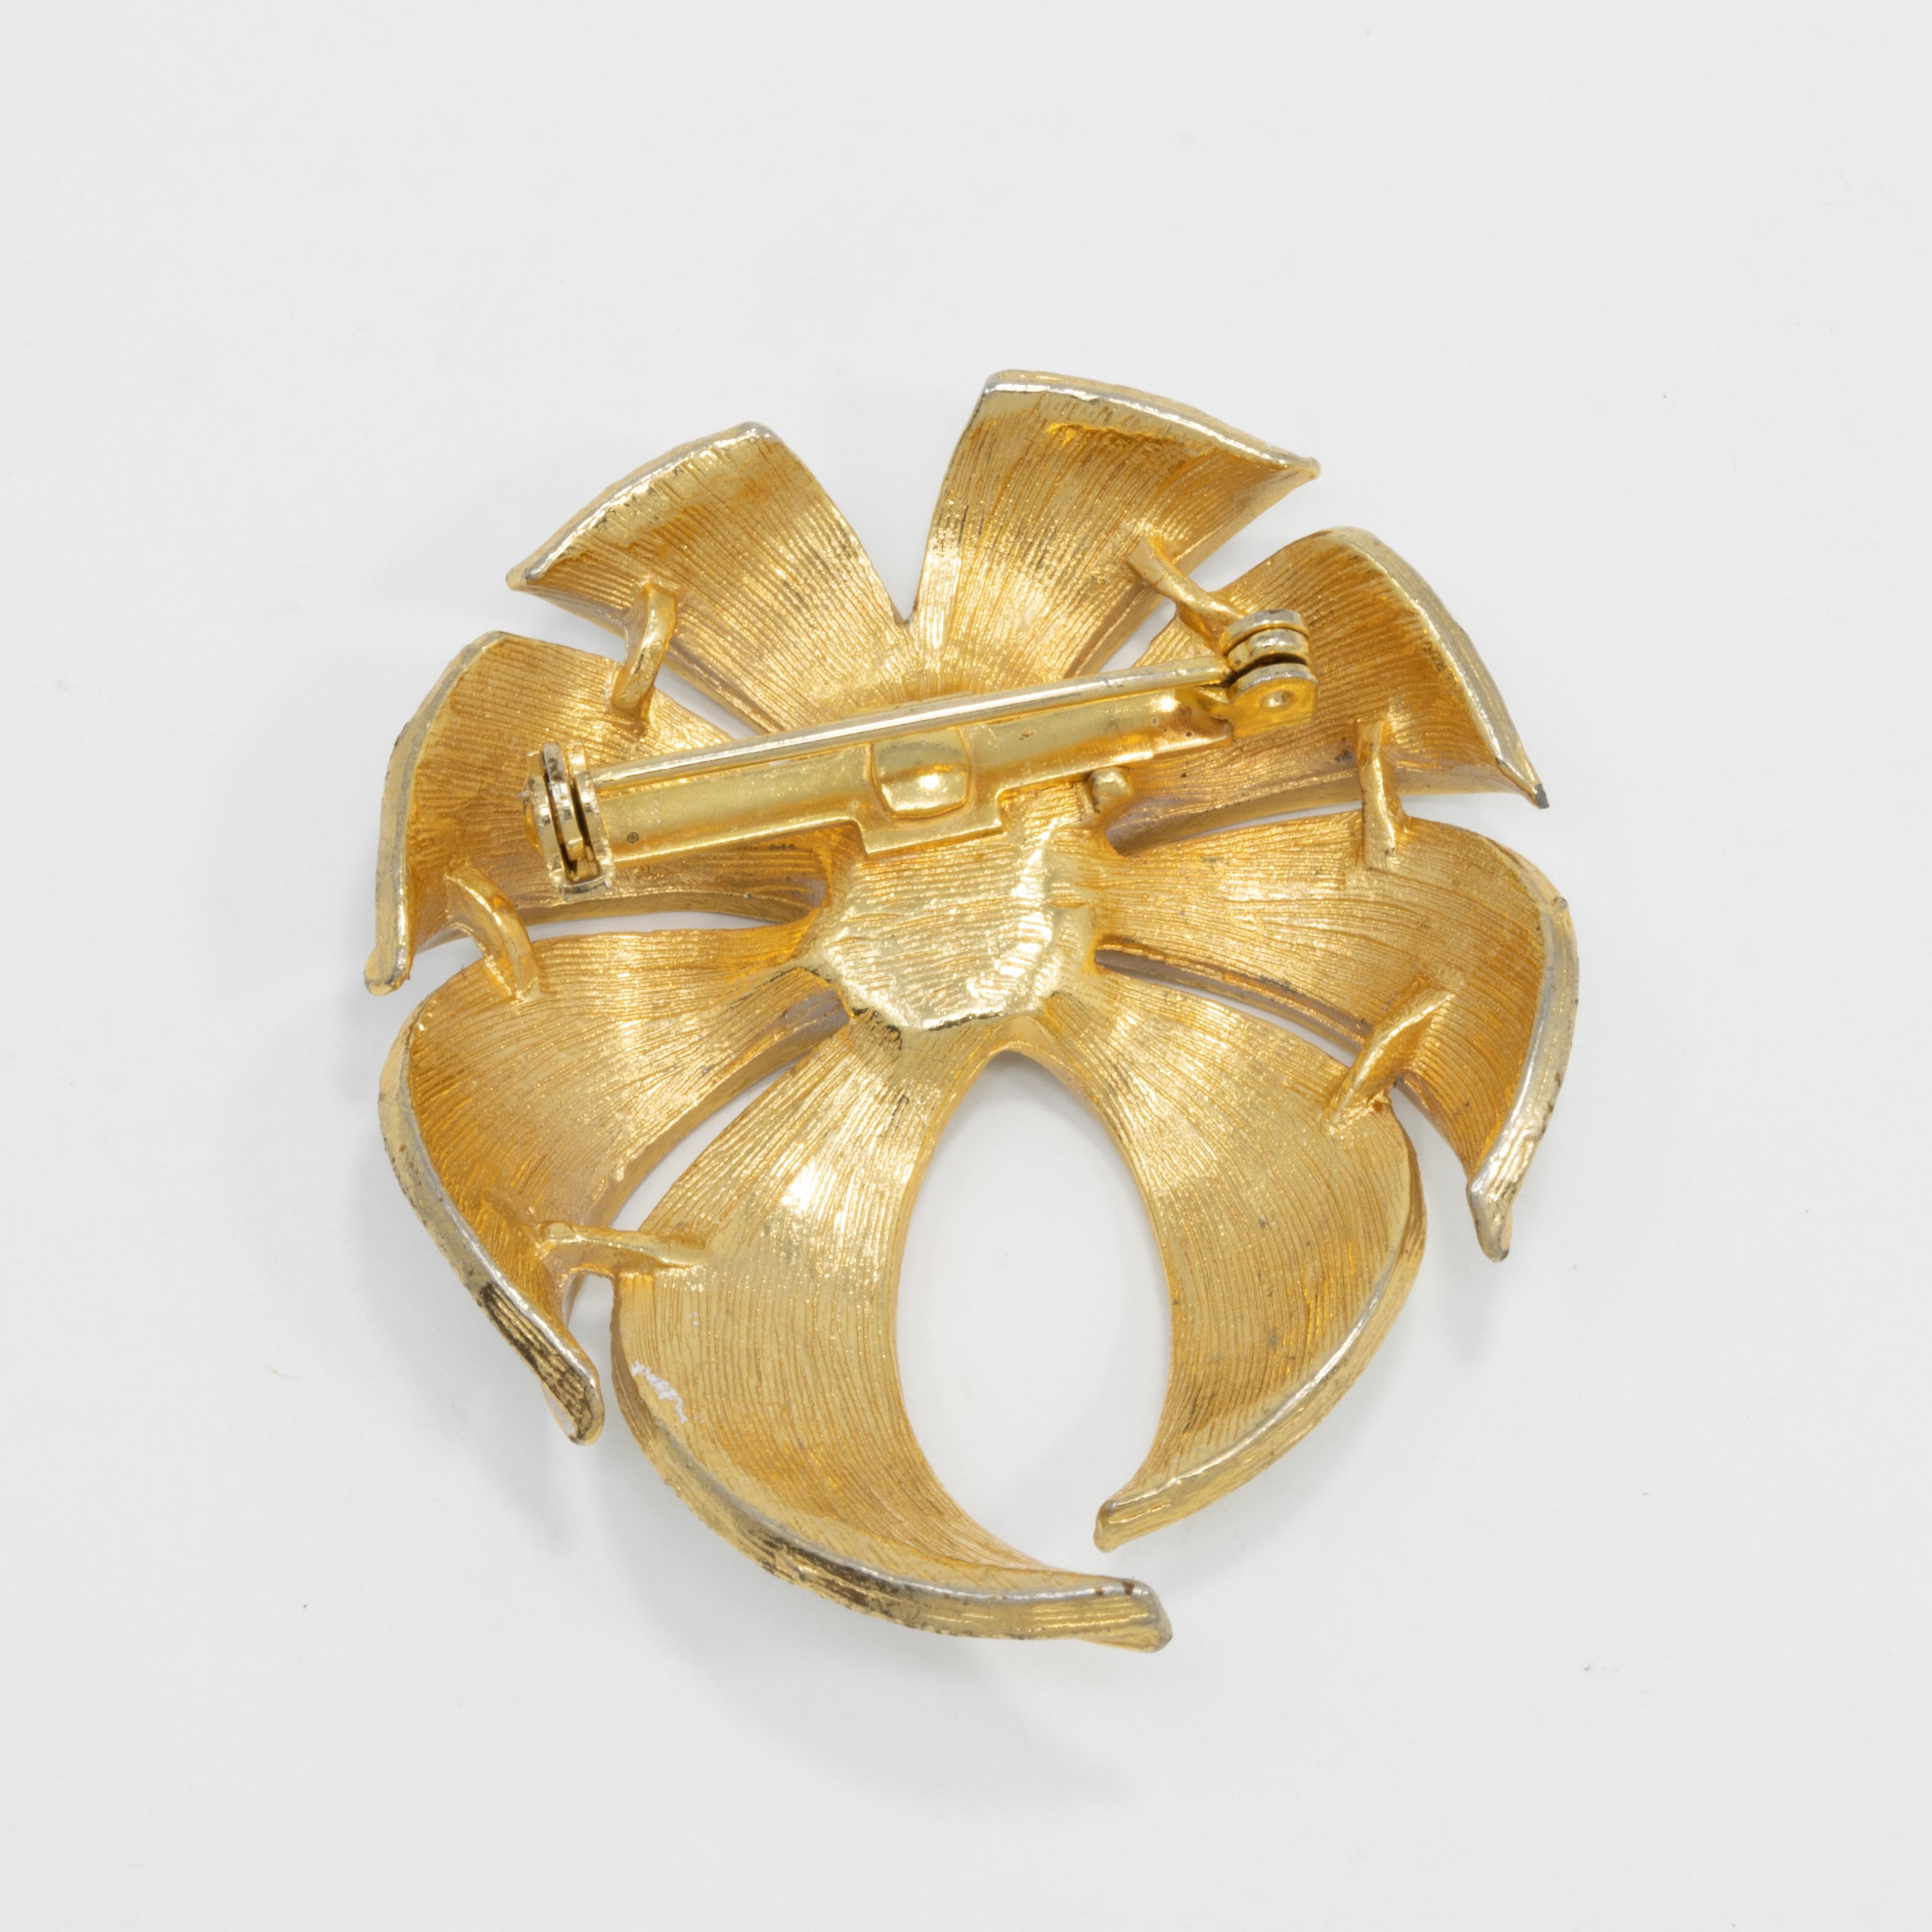 A golden flower, painted with lily-white enamel - the perfect touch of class!

Circa mid to late 1900s.

Gold-plated. Light wear of enamel on top brooch.
